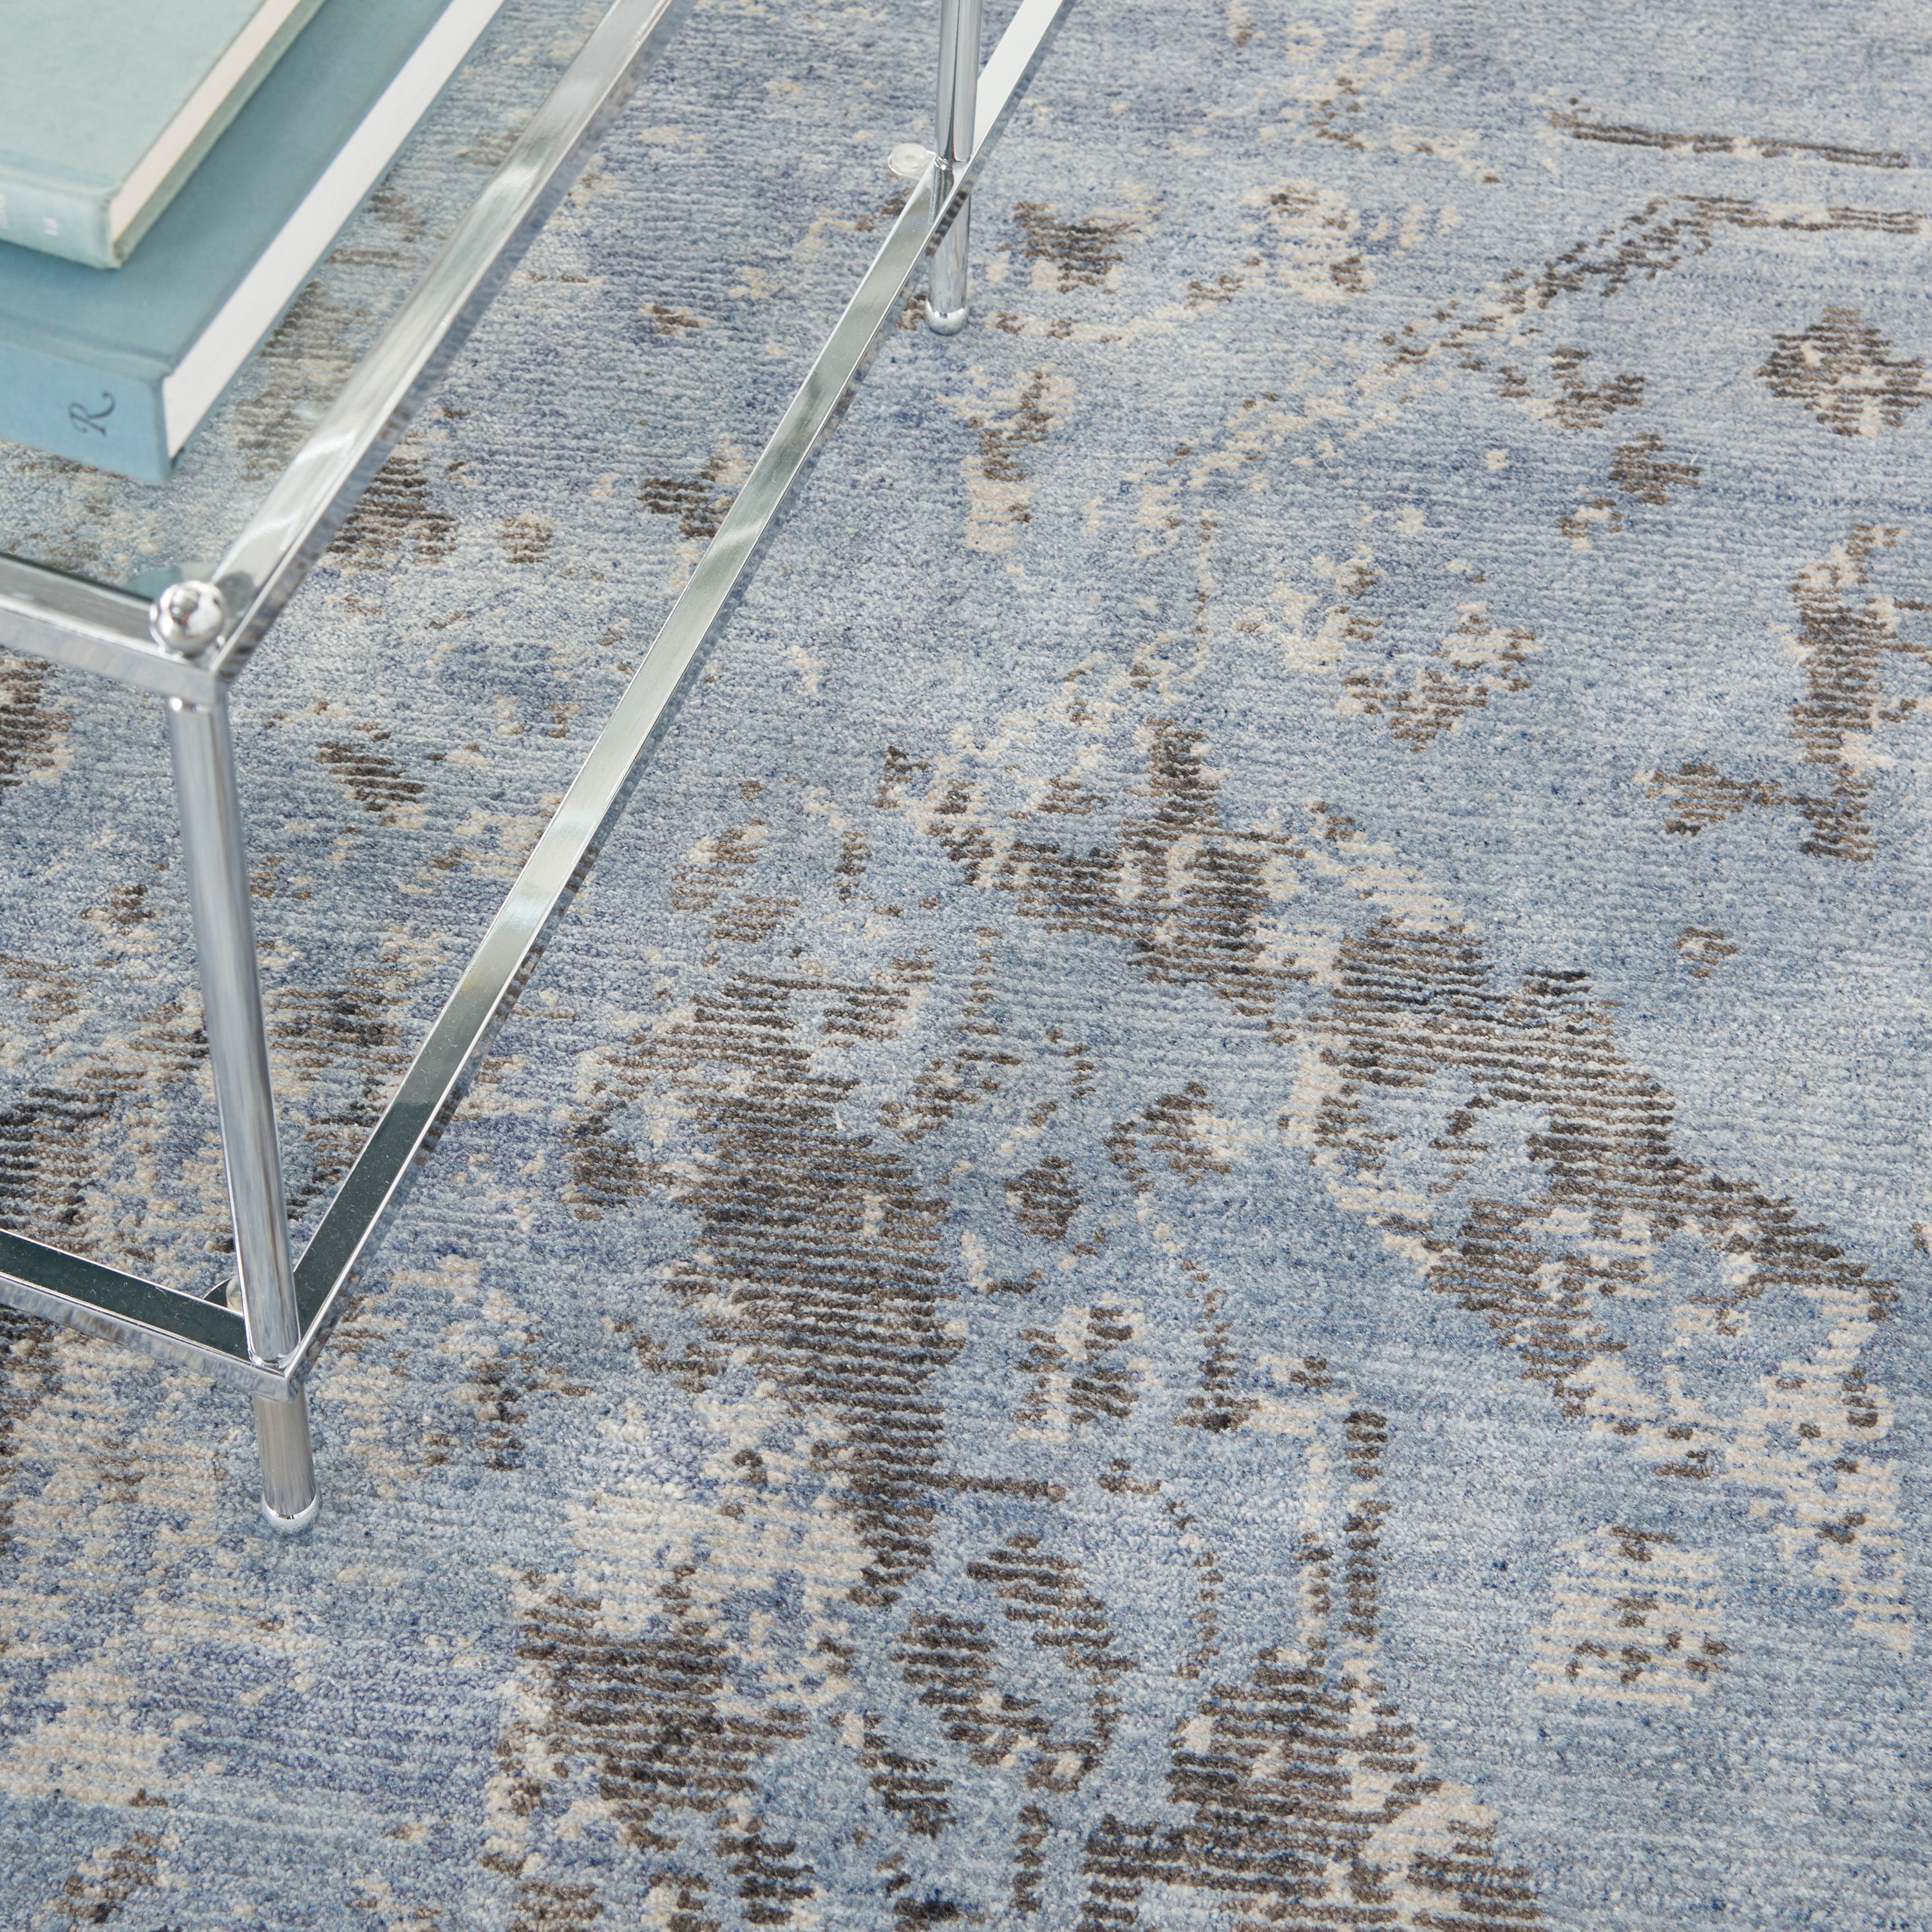 Close-up of a predominantly blue distressed patterned carpet with furniture leg.